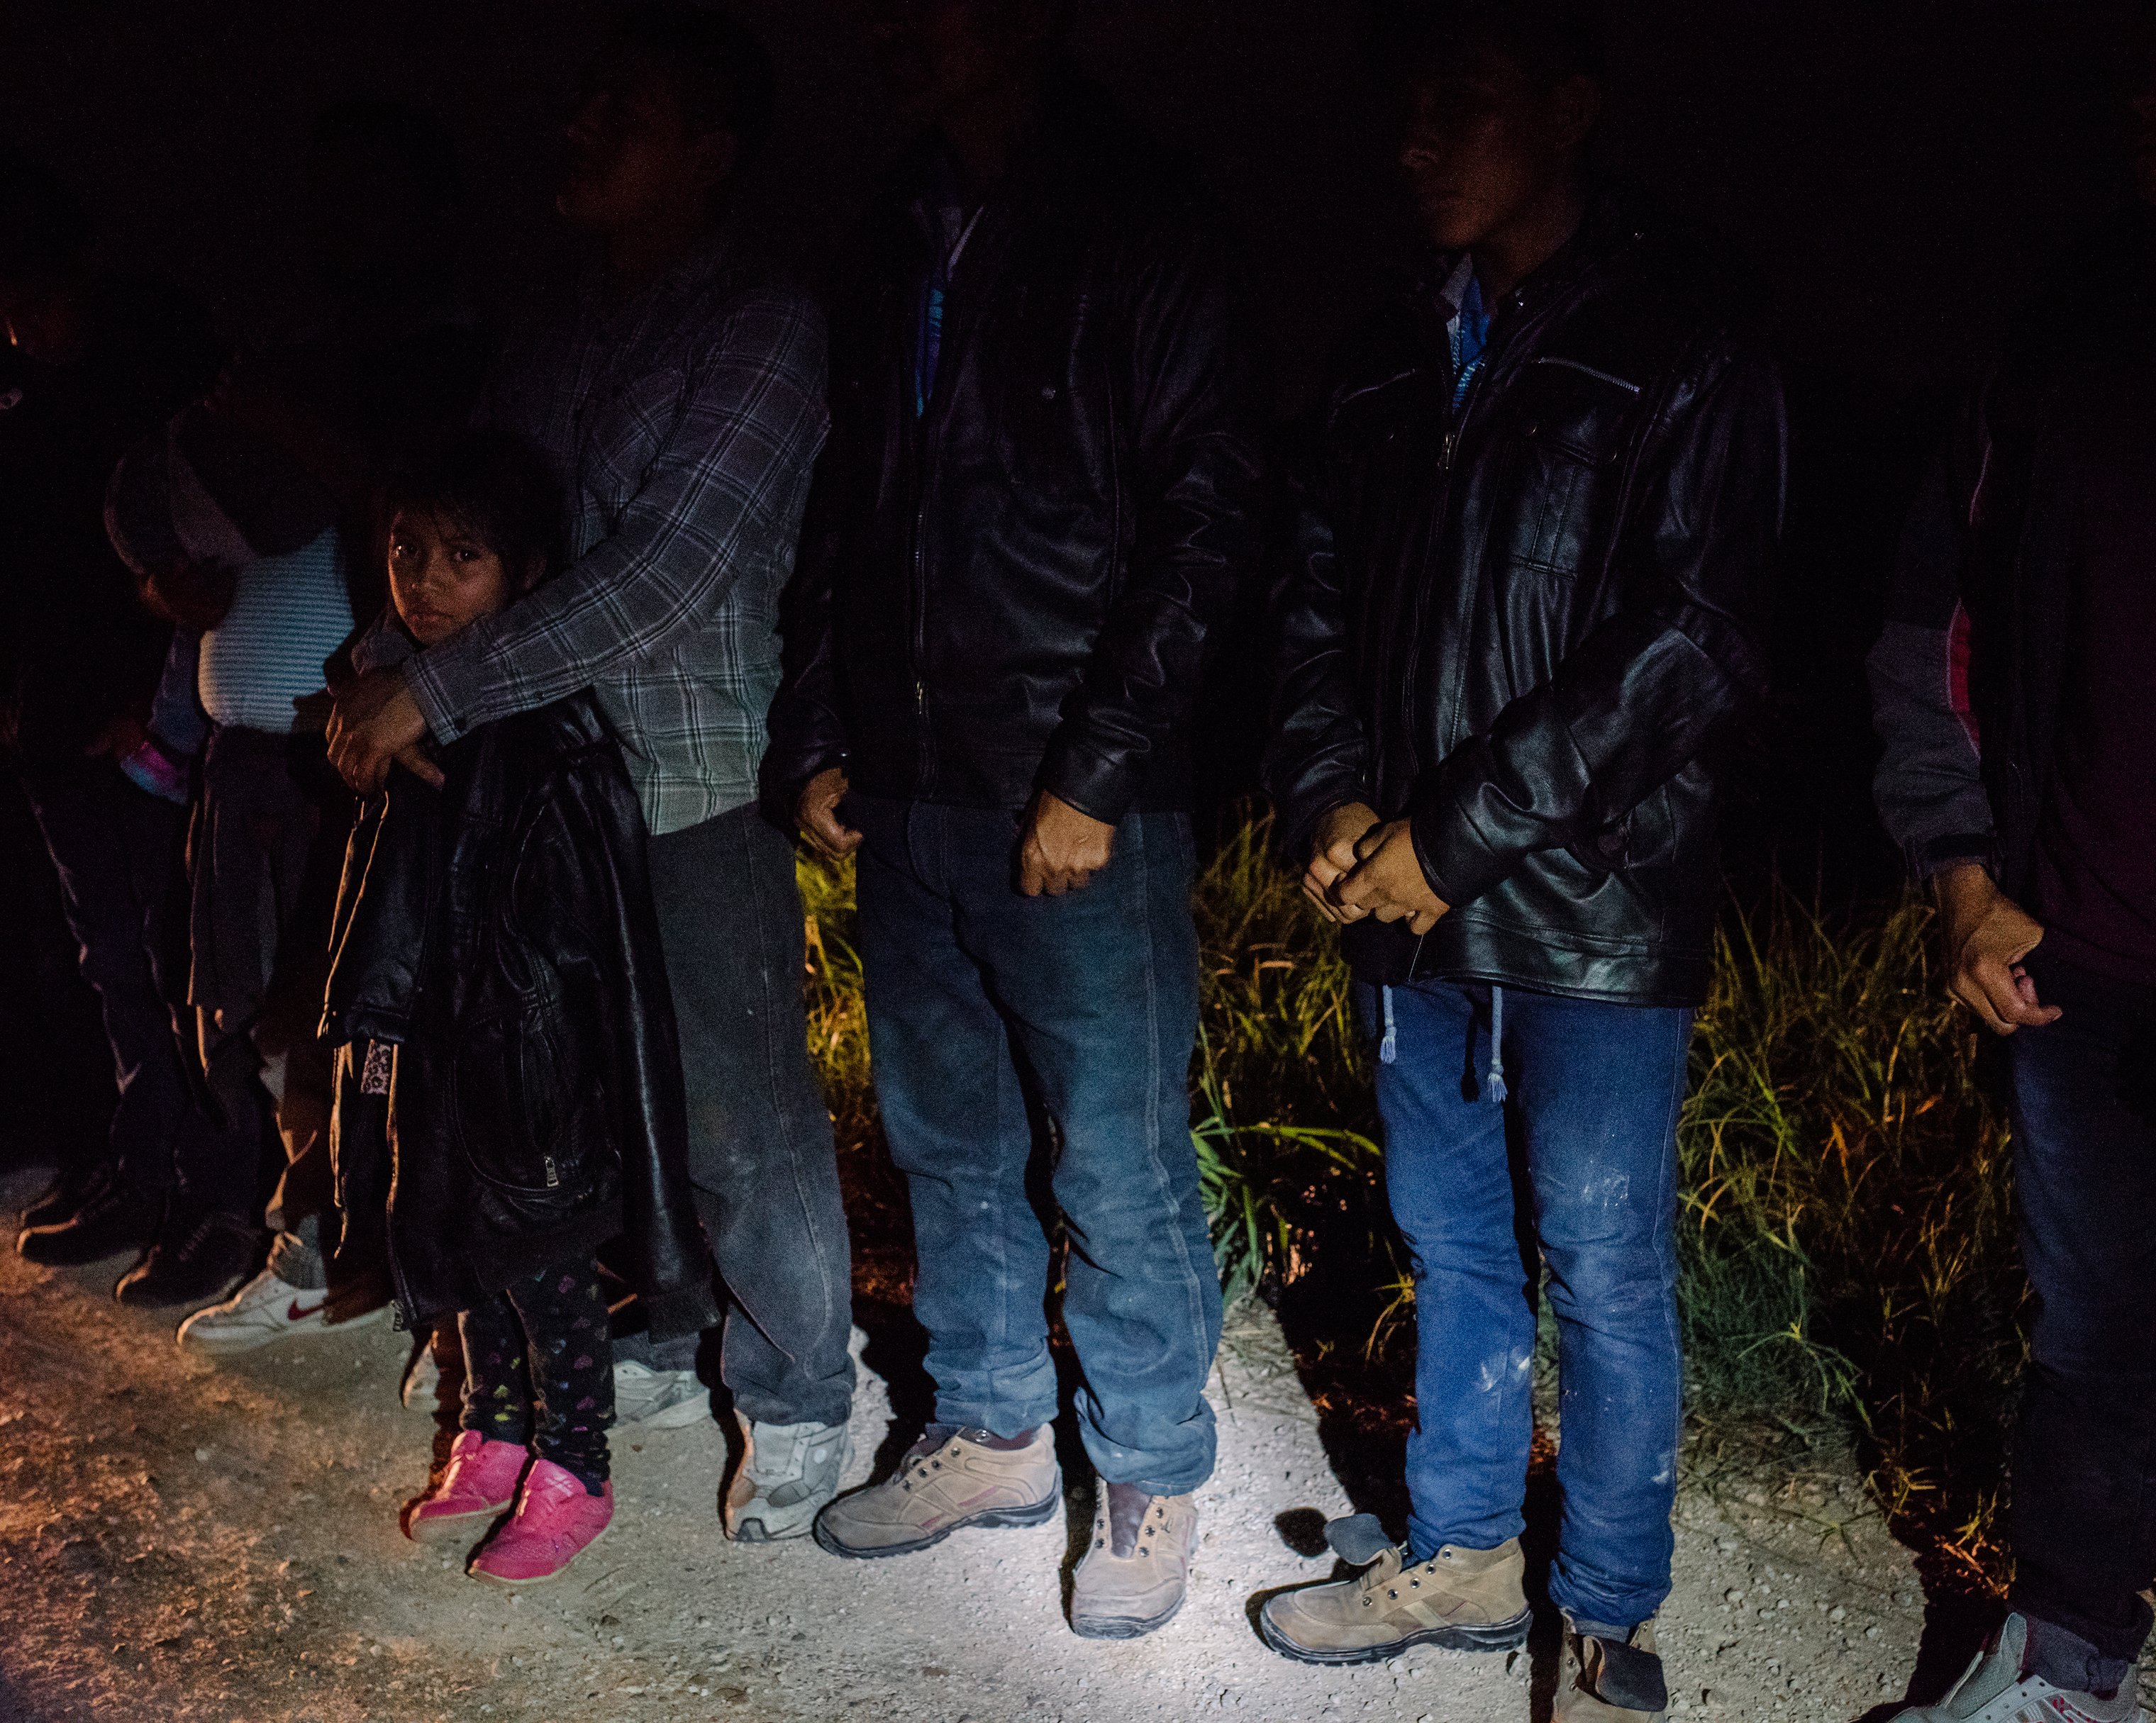 U.S. Border Patrol agents arrest a group of 43 Central American migrants, including children, on a roadside in McAllen, Texas, during a predawn patrol in late September. (John Francis Peters for TIME)